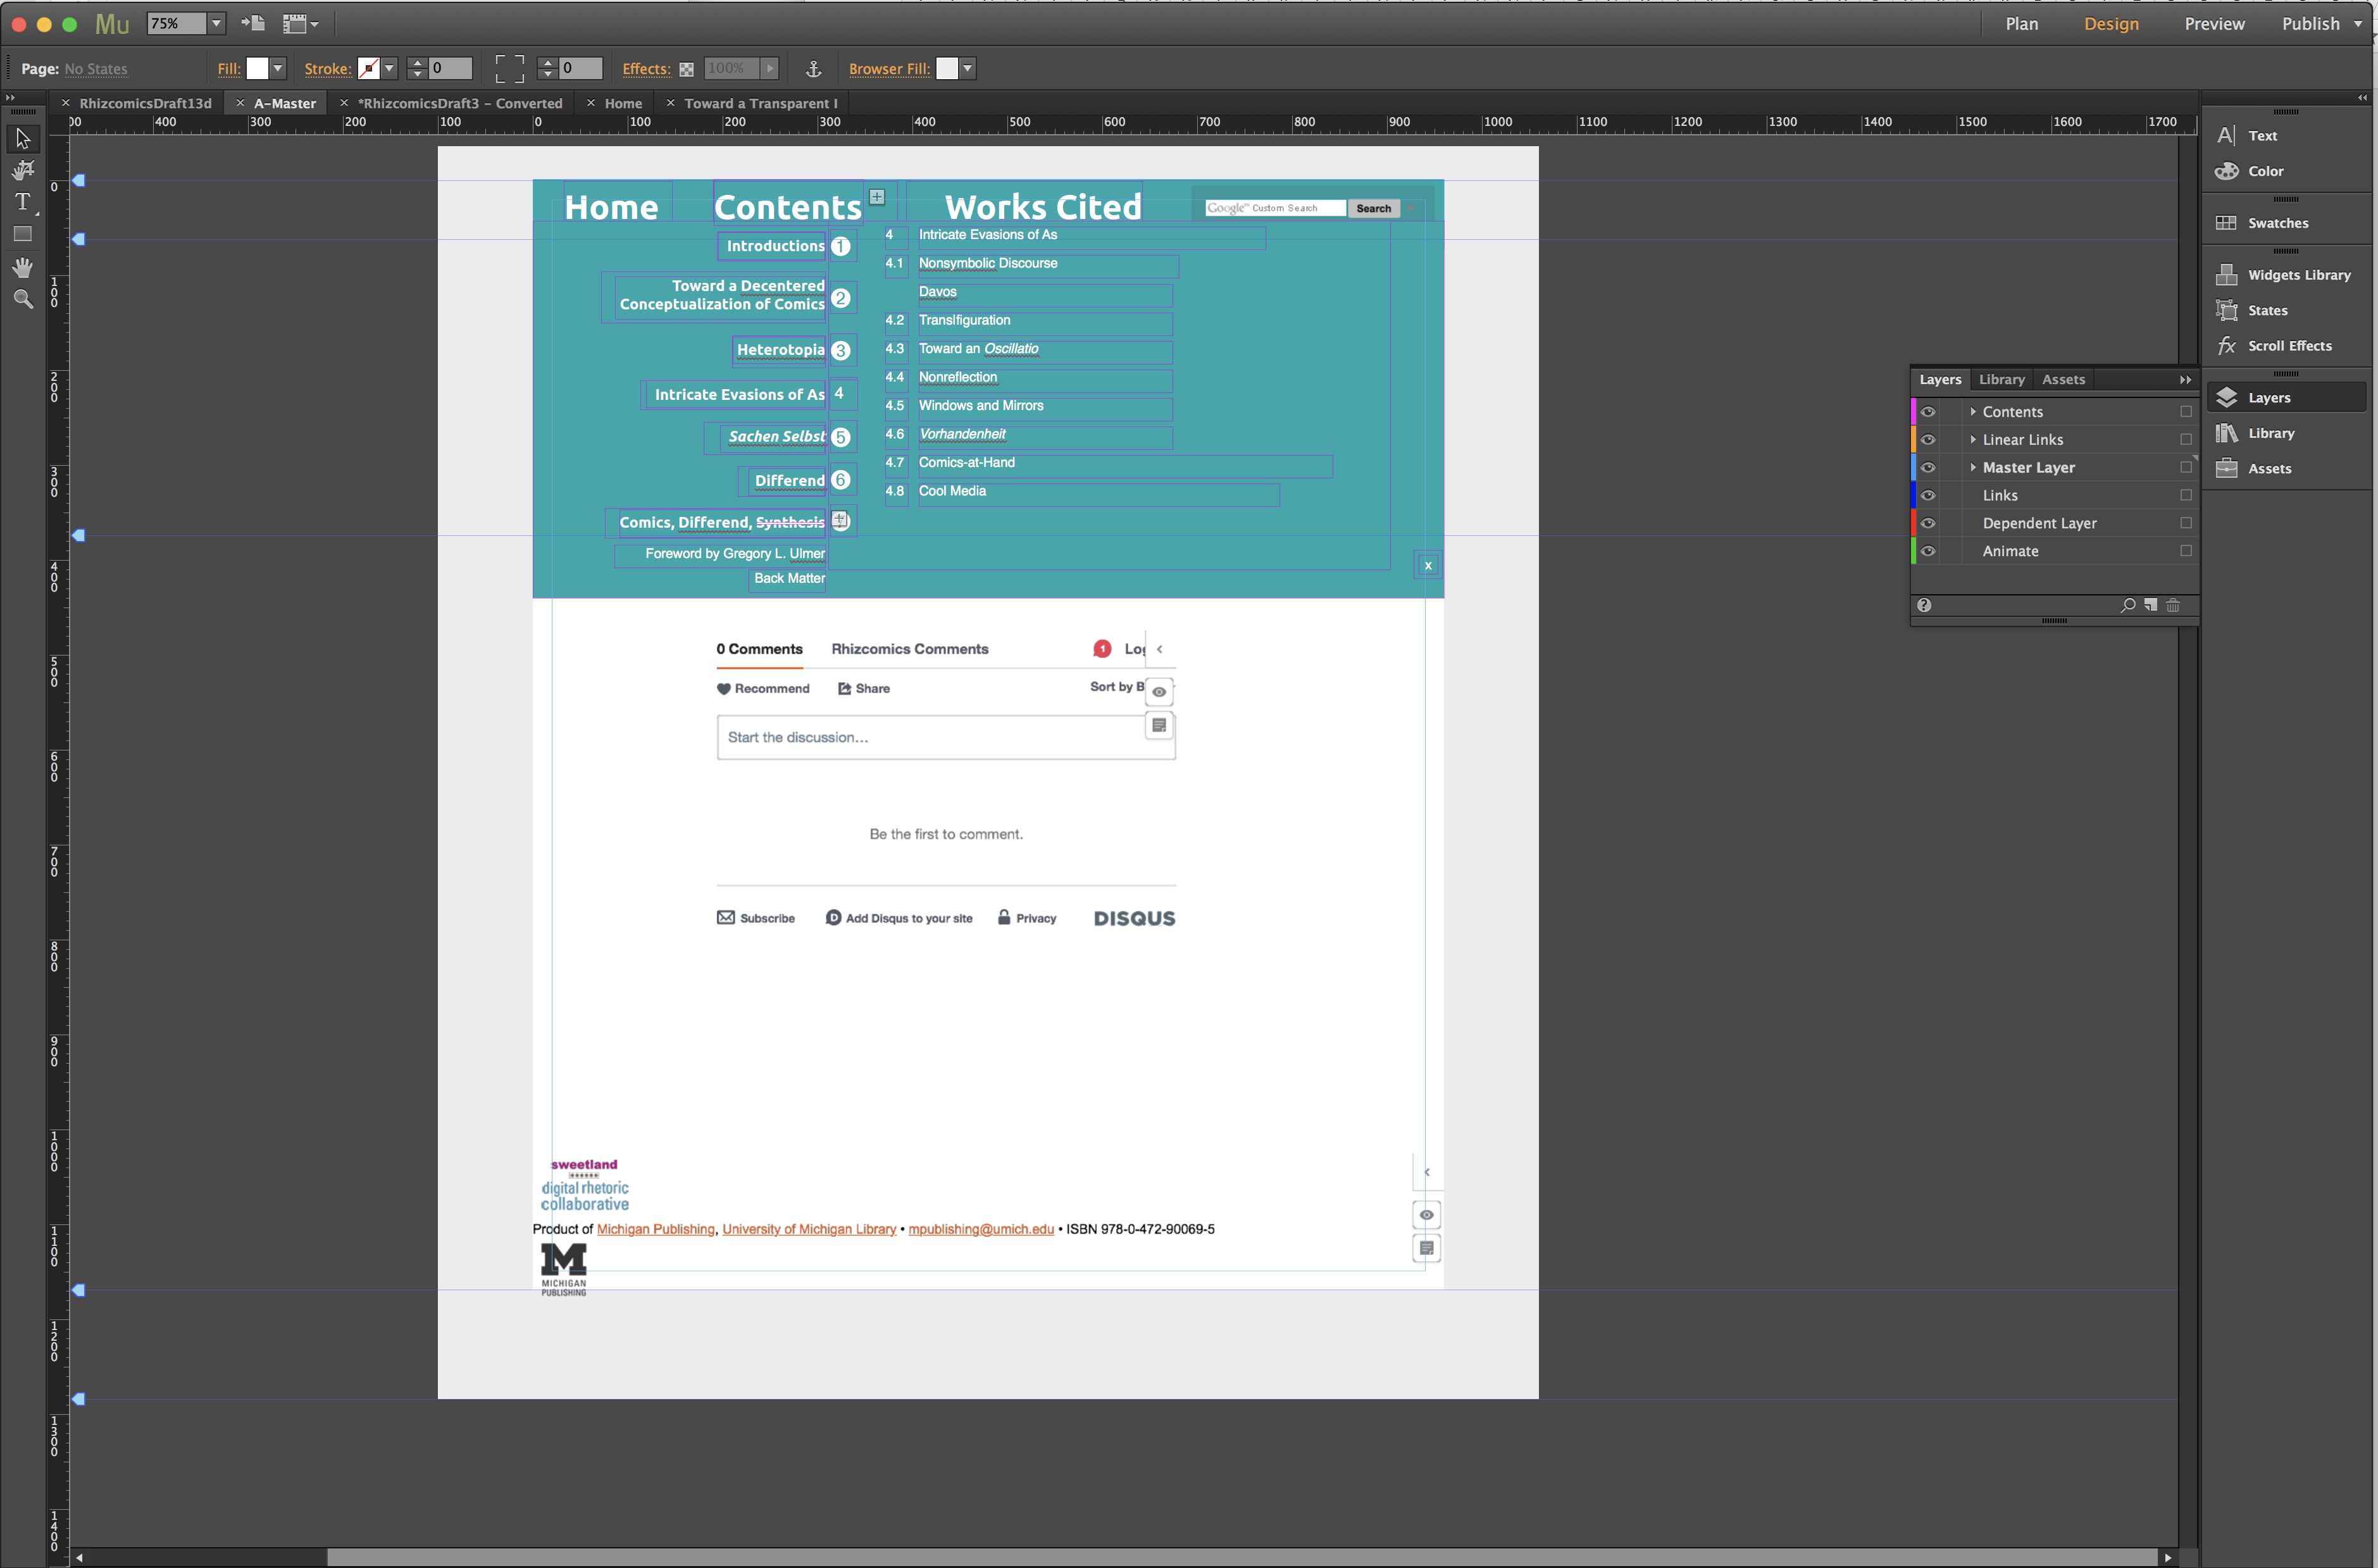 Adobe Muse workspace displaying a horizontal navigation bar at the top with Home, Contents, and Works Cited links, with a menu of links below